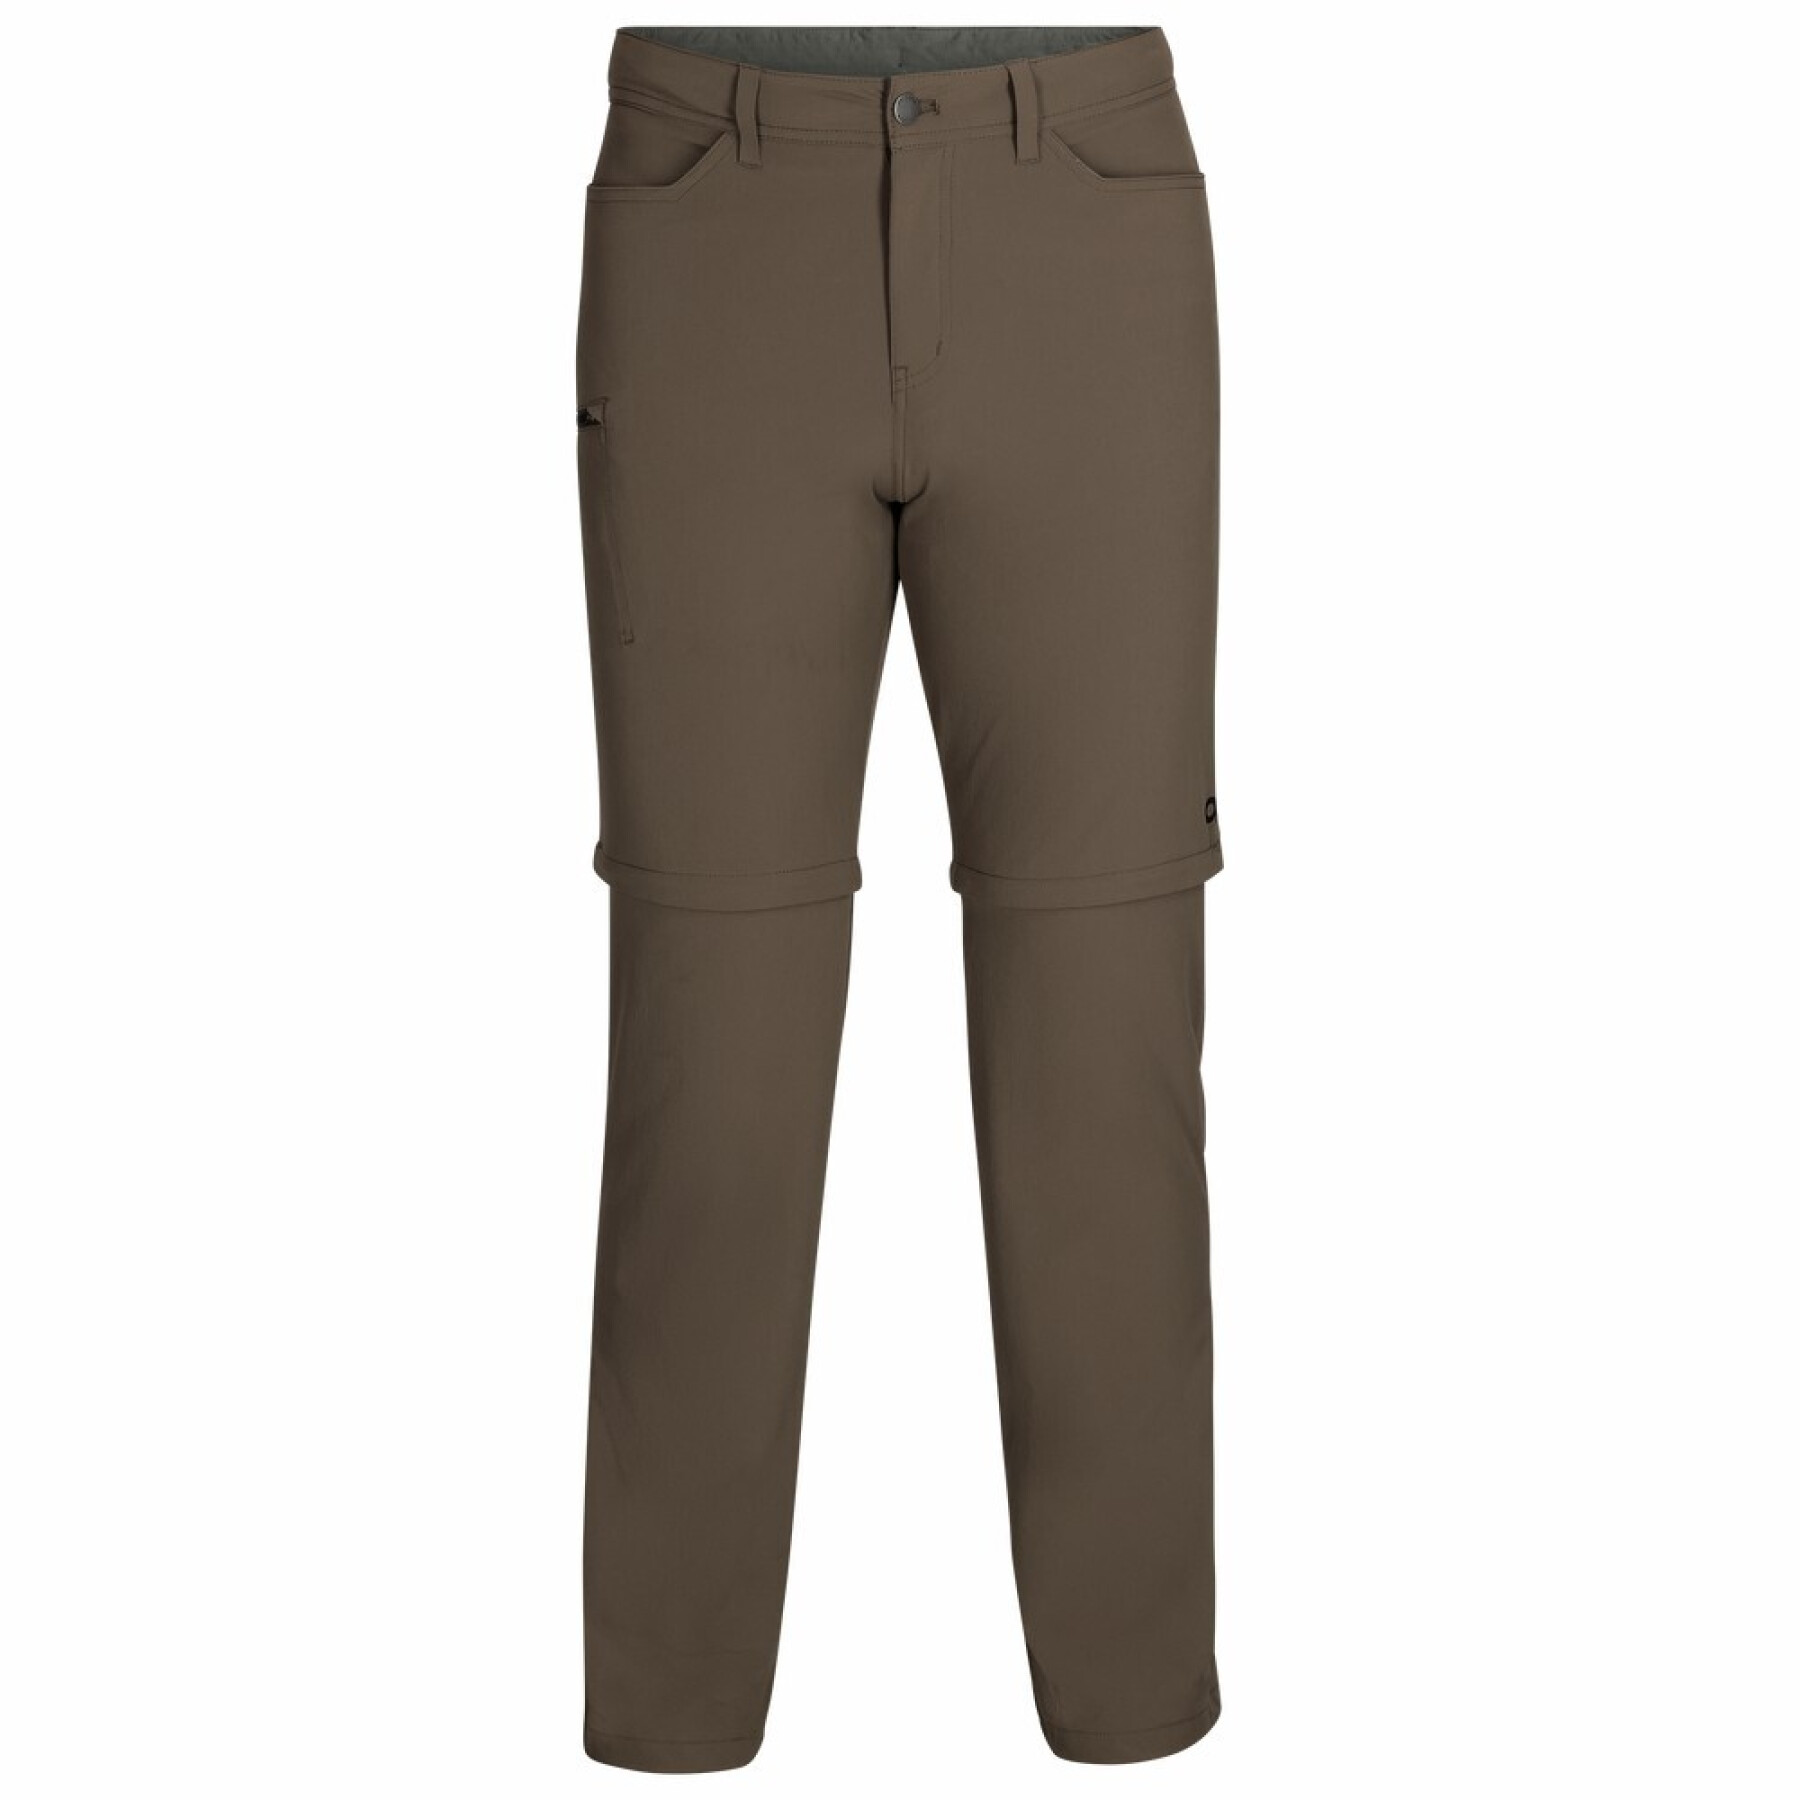 Convertible pants Outdoor Research Ferrosi 32"